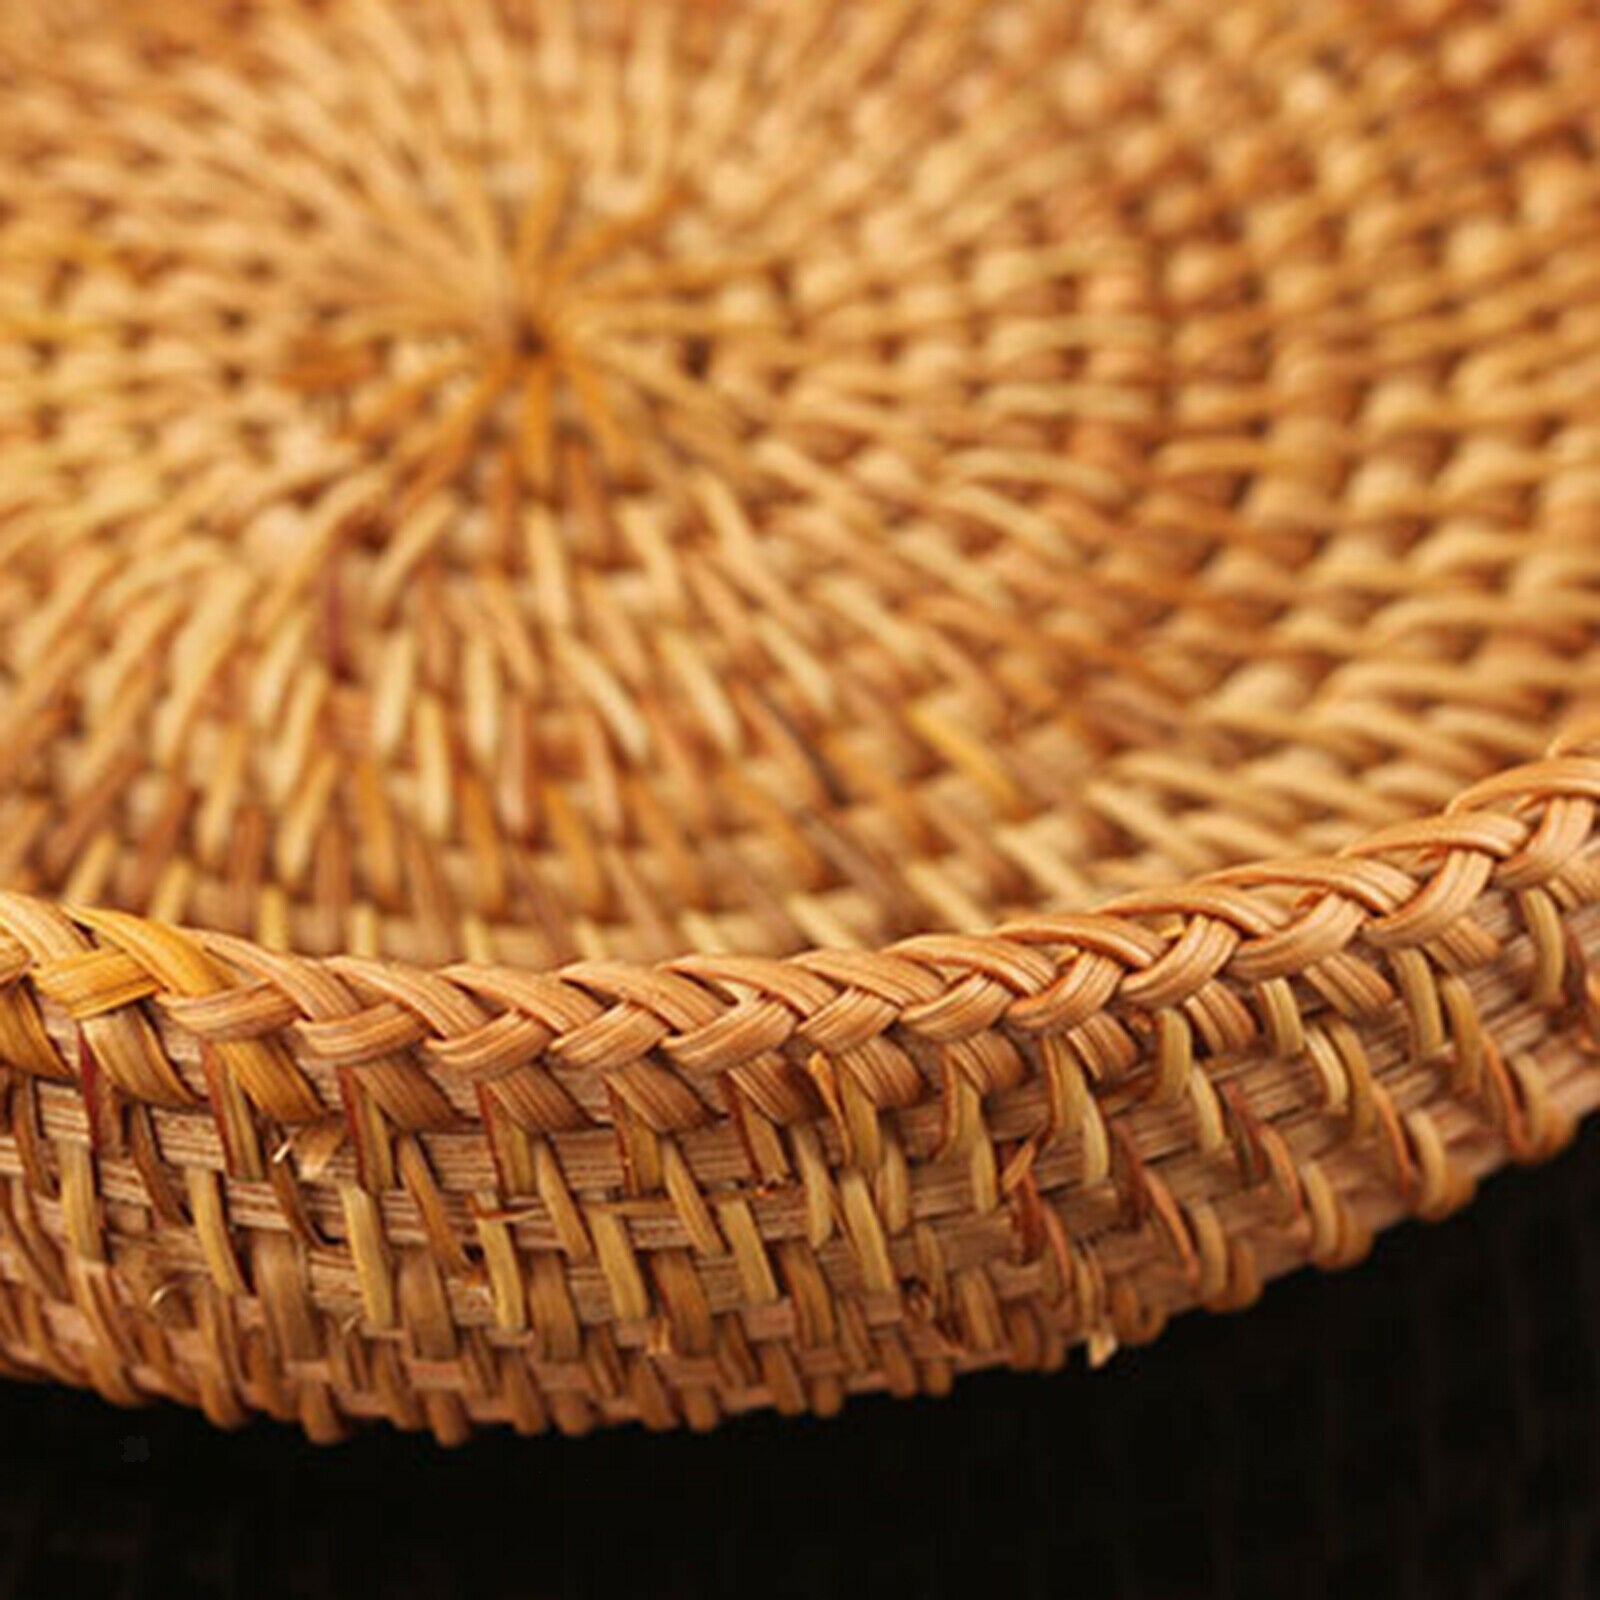 Round Wicker Woven Storage Basket for Home, Shops or Markets Container